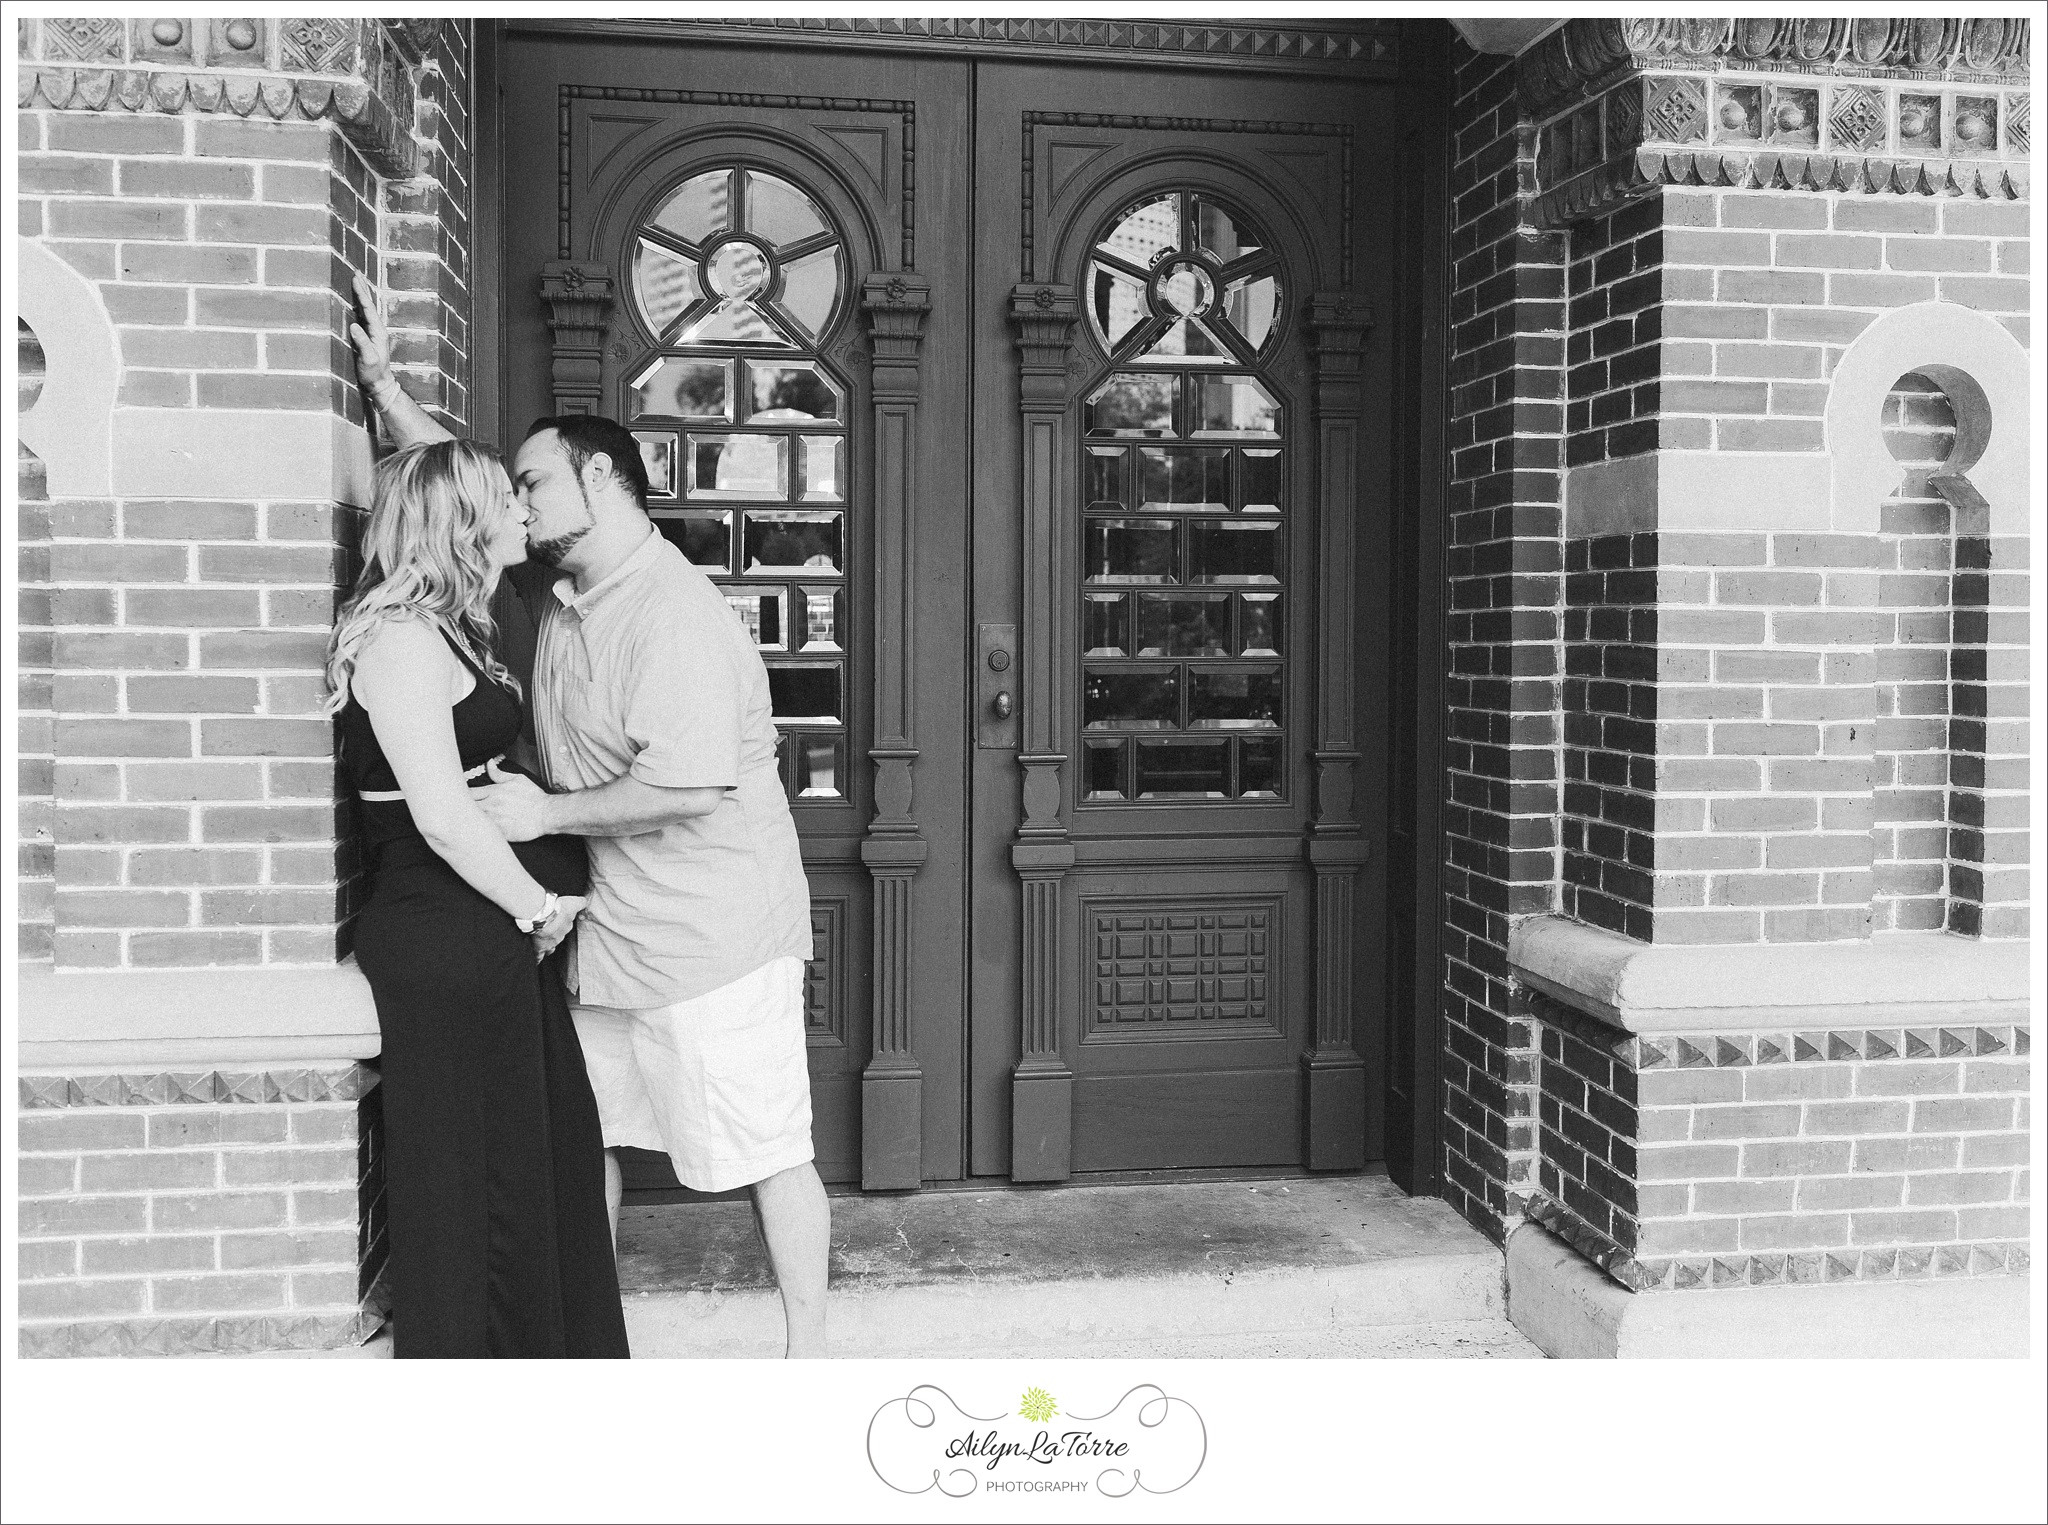 South Tampa Maternity | © Ailyn La Torre Photography 2014